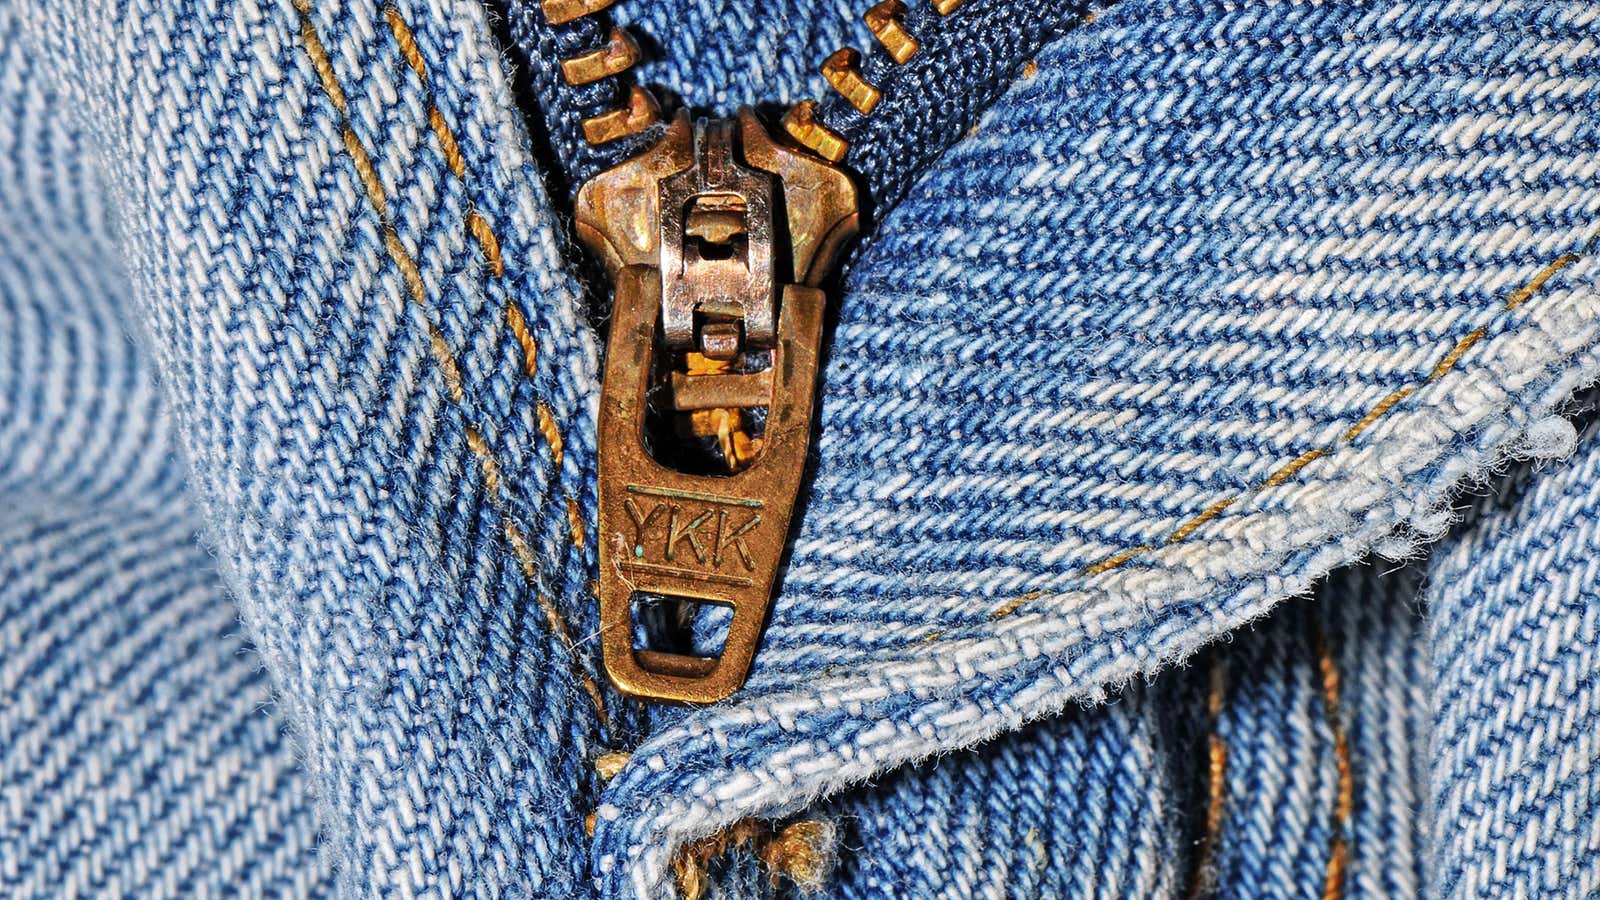 Zipper 101: Different Types of Zippers, Parts, & Sliders